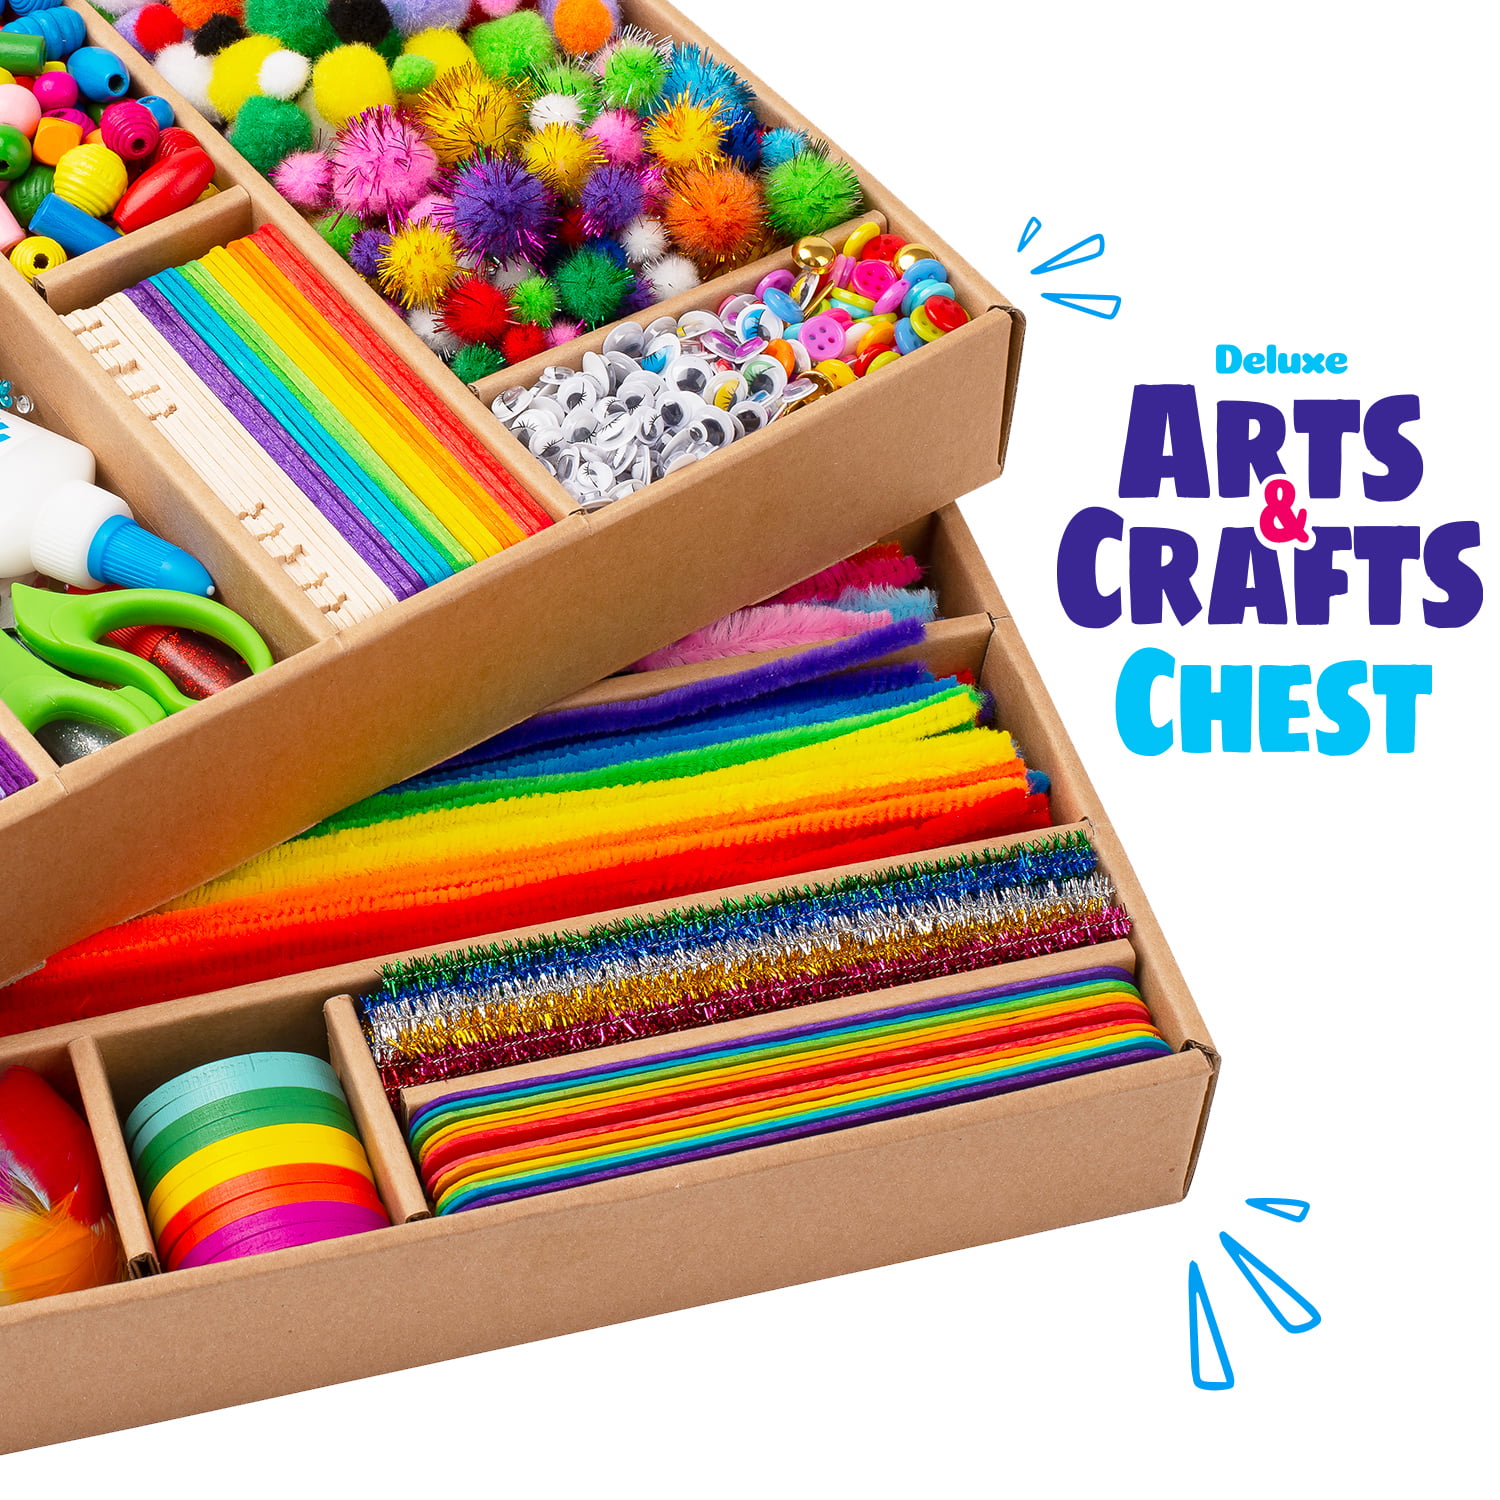 Blue Squid Arts and Crafts for Kids - 3000+ Piece Deluxe Craft Chest - Kids  Art Supplies Craft Box 